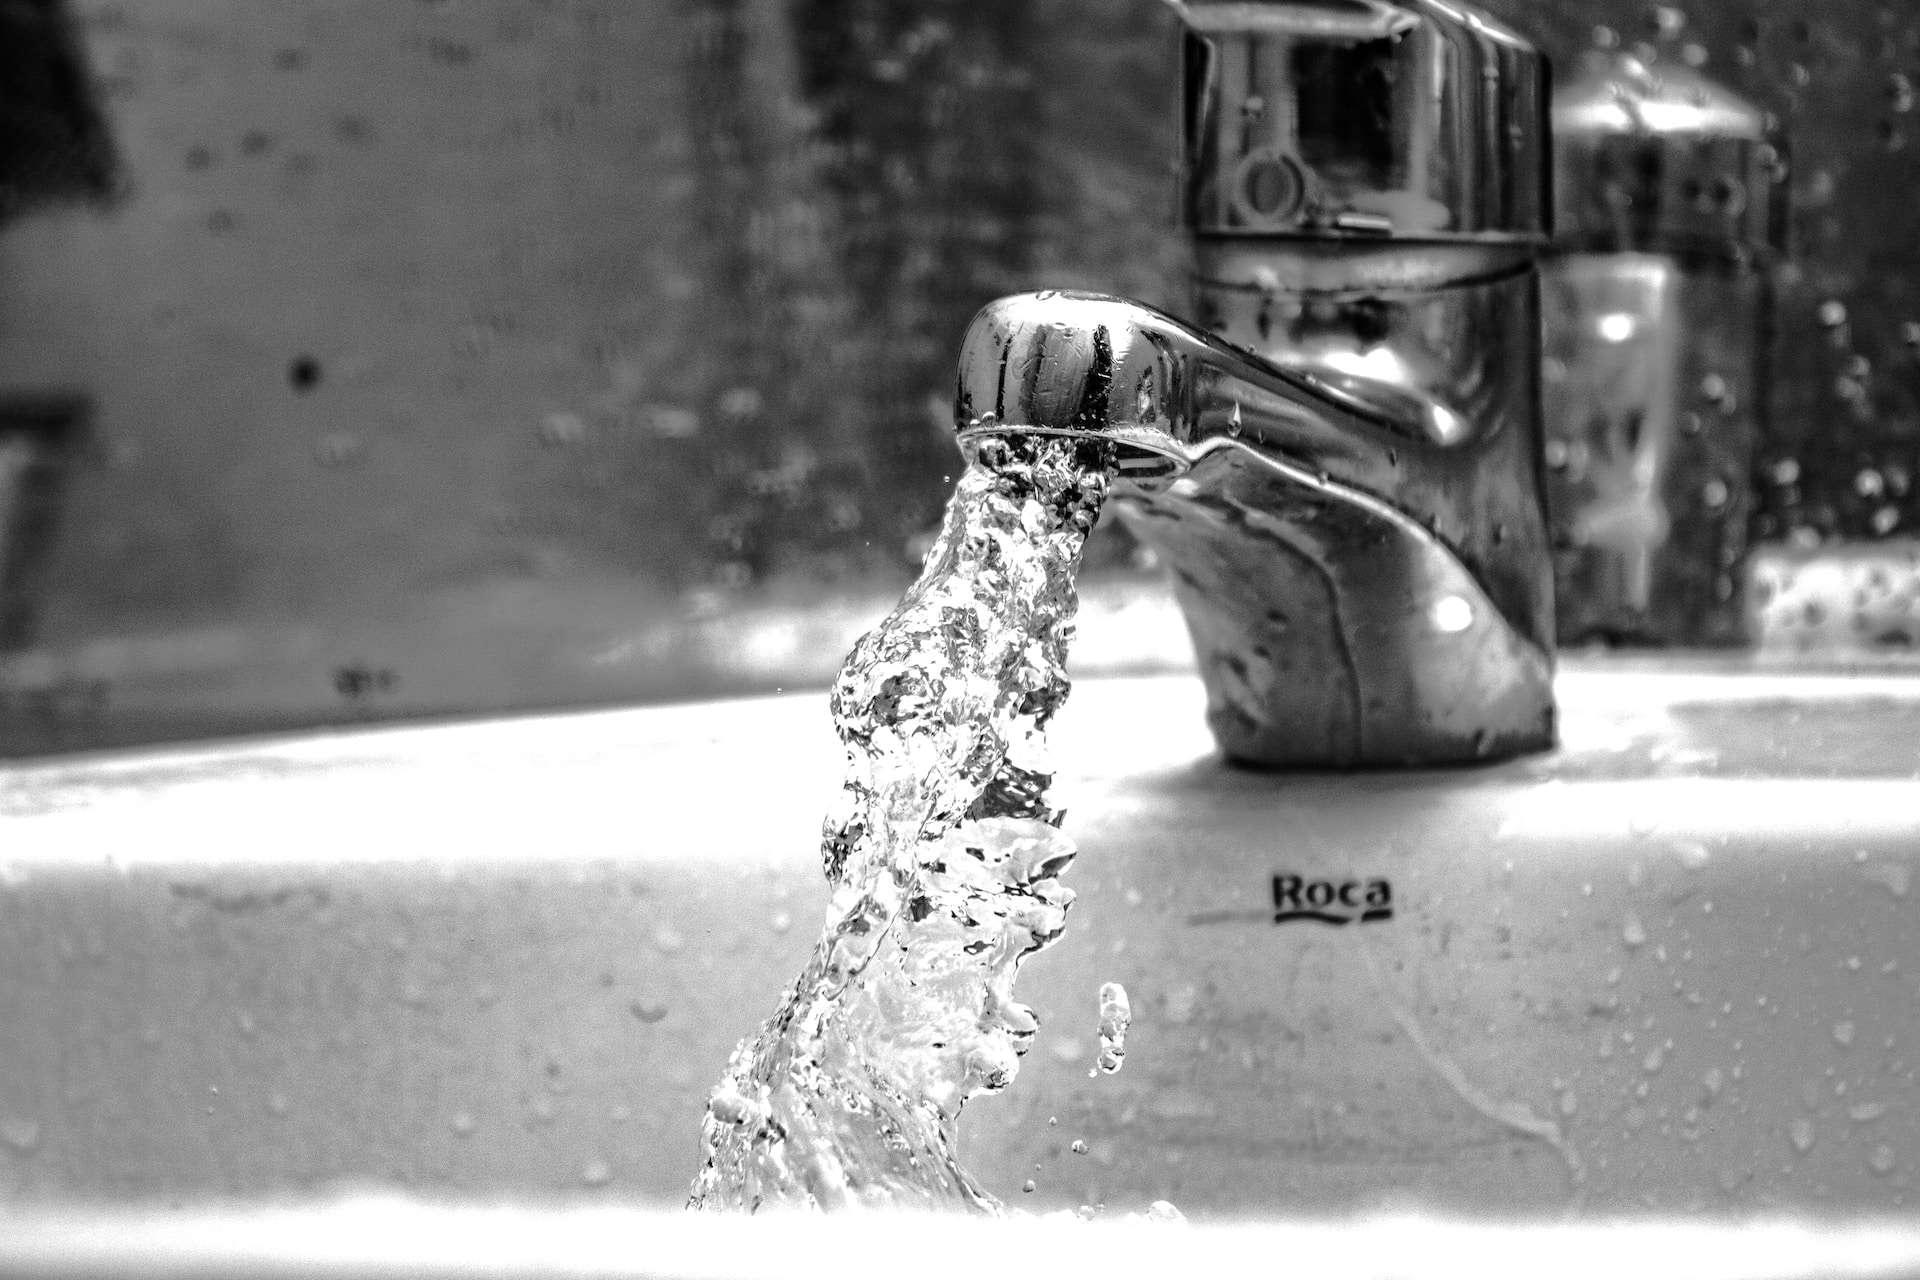 Water coming out of faucet